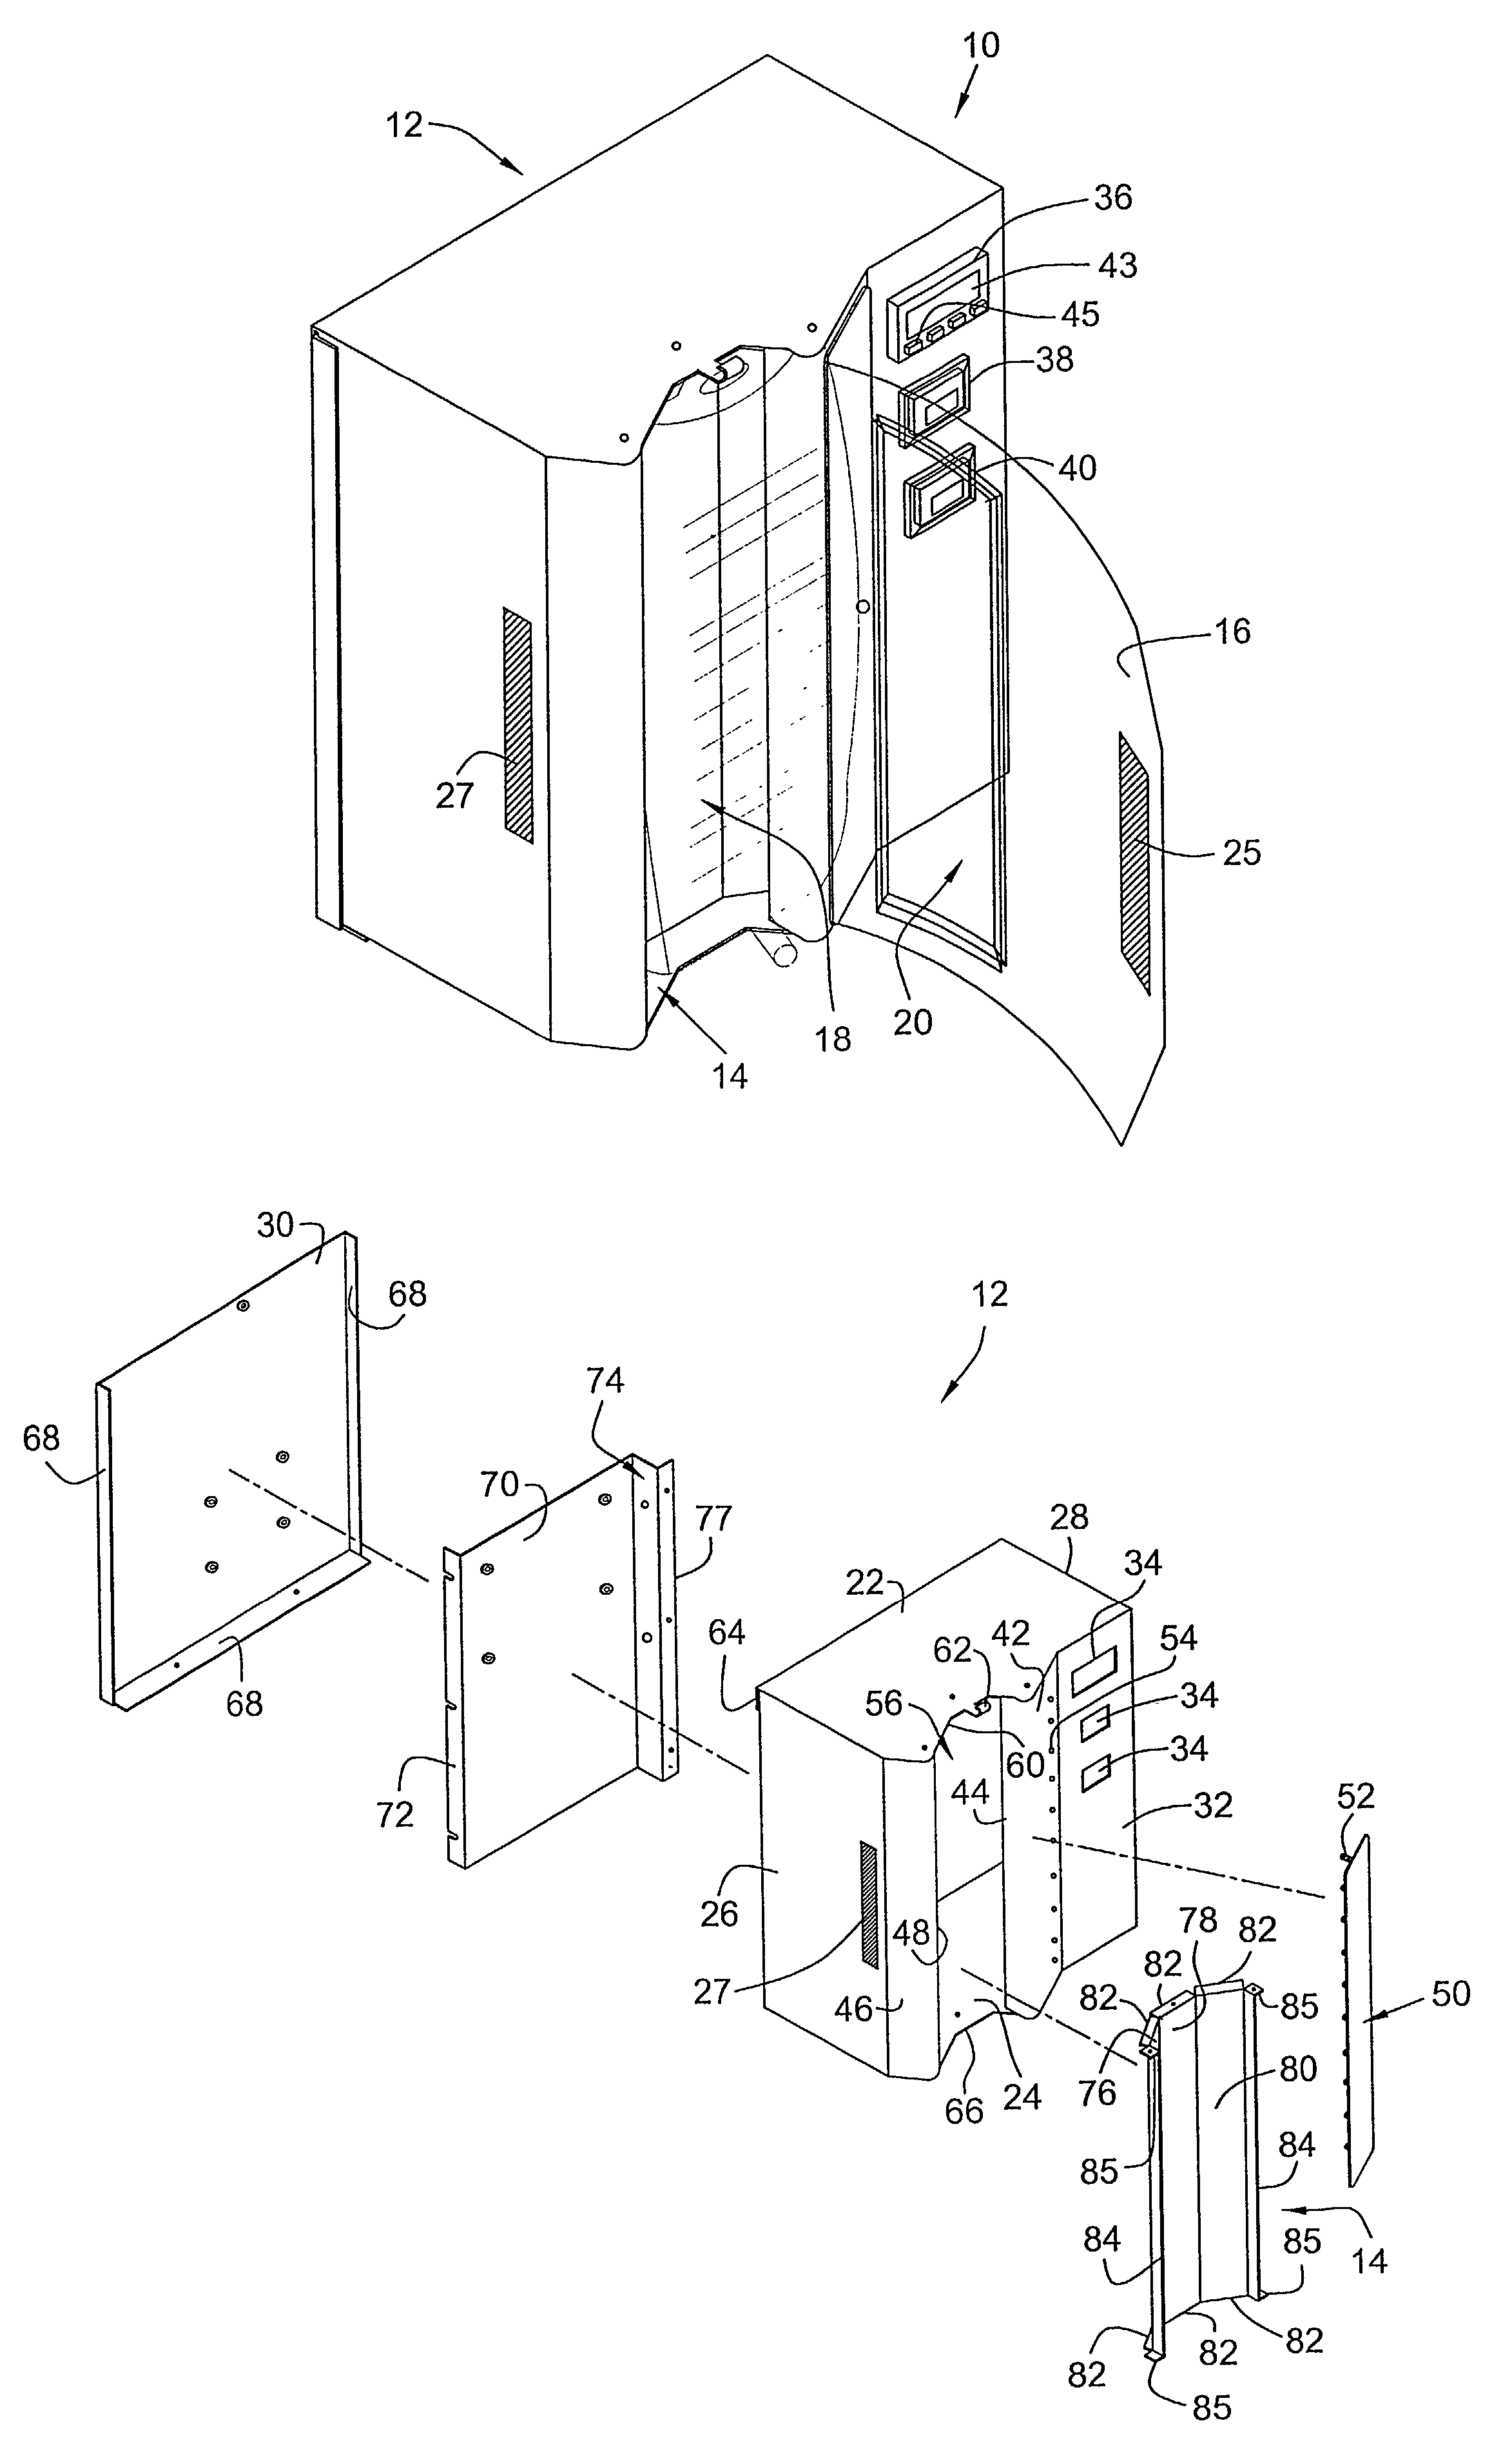 Method and apparatus for controlling pressurized infusion and temperature of infused liquids